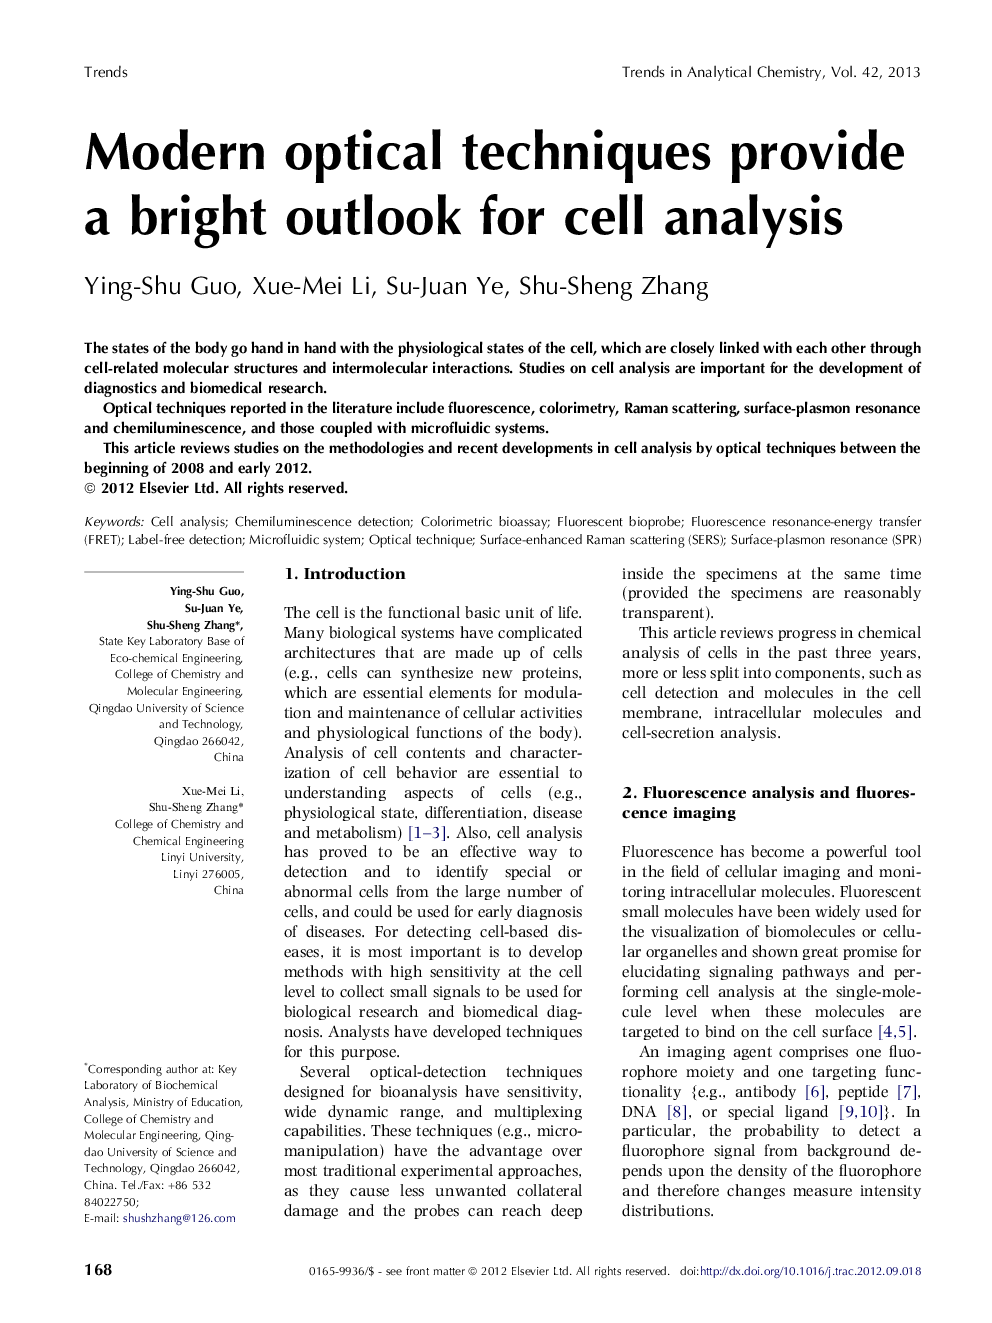 Modern optical techniques provide a bright outlook for cell analysis